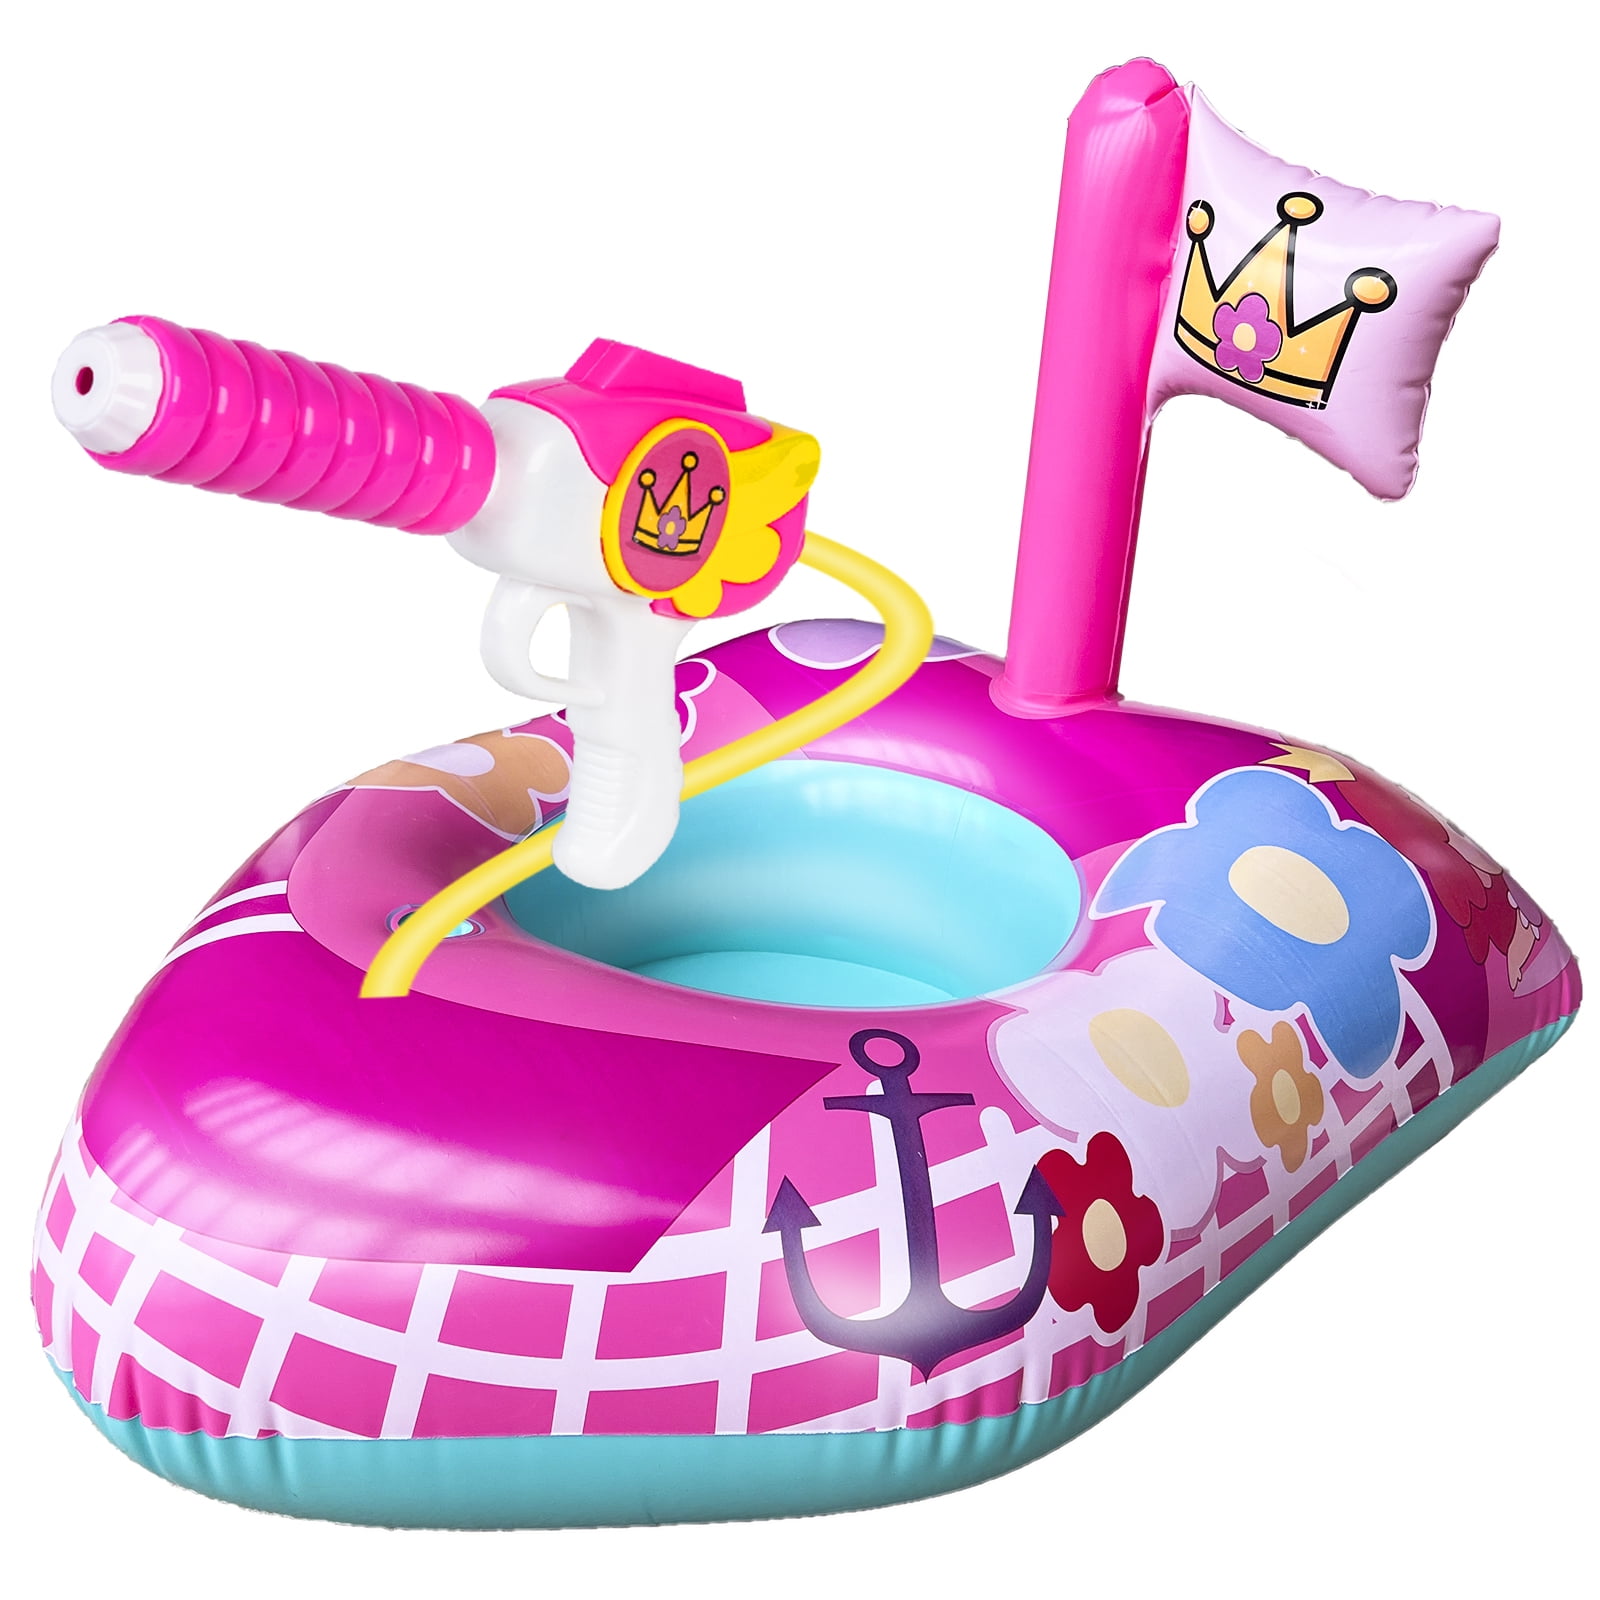 Girls Inflatable Floats Seat Swimming Swim Ring Pool Water Sports Beach Toy Pink 